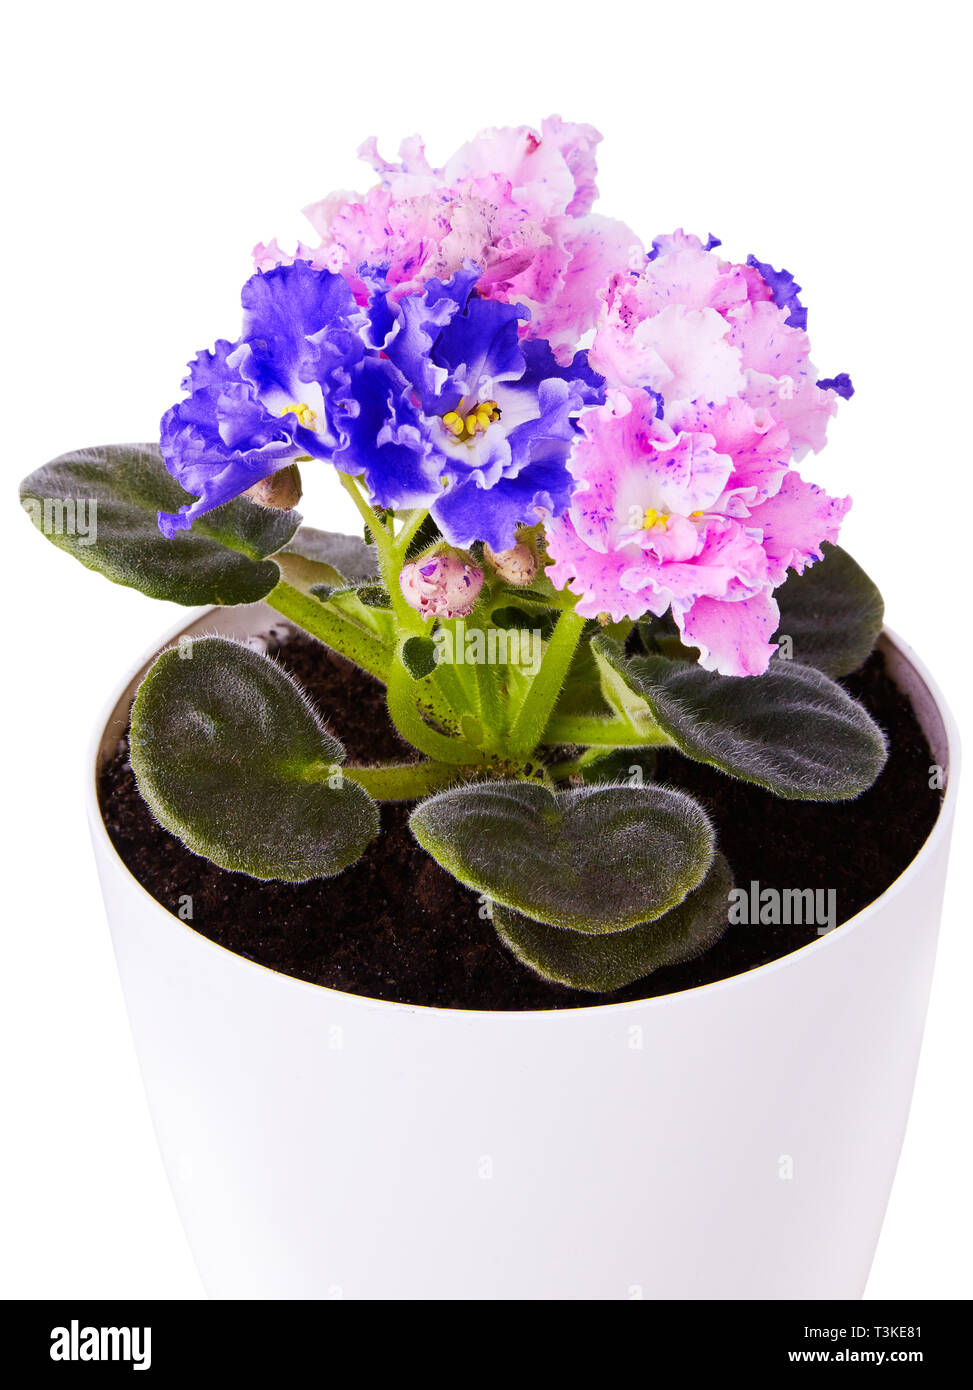 Close up of beautiful duocolor hybrid pink and blue saintpaulia (African violets)  flower  with wavy  edge in the pot. Stock Photo